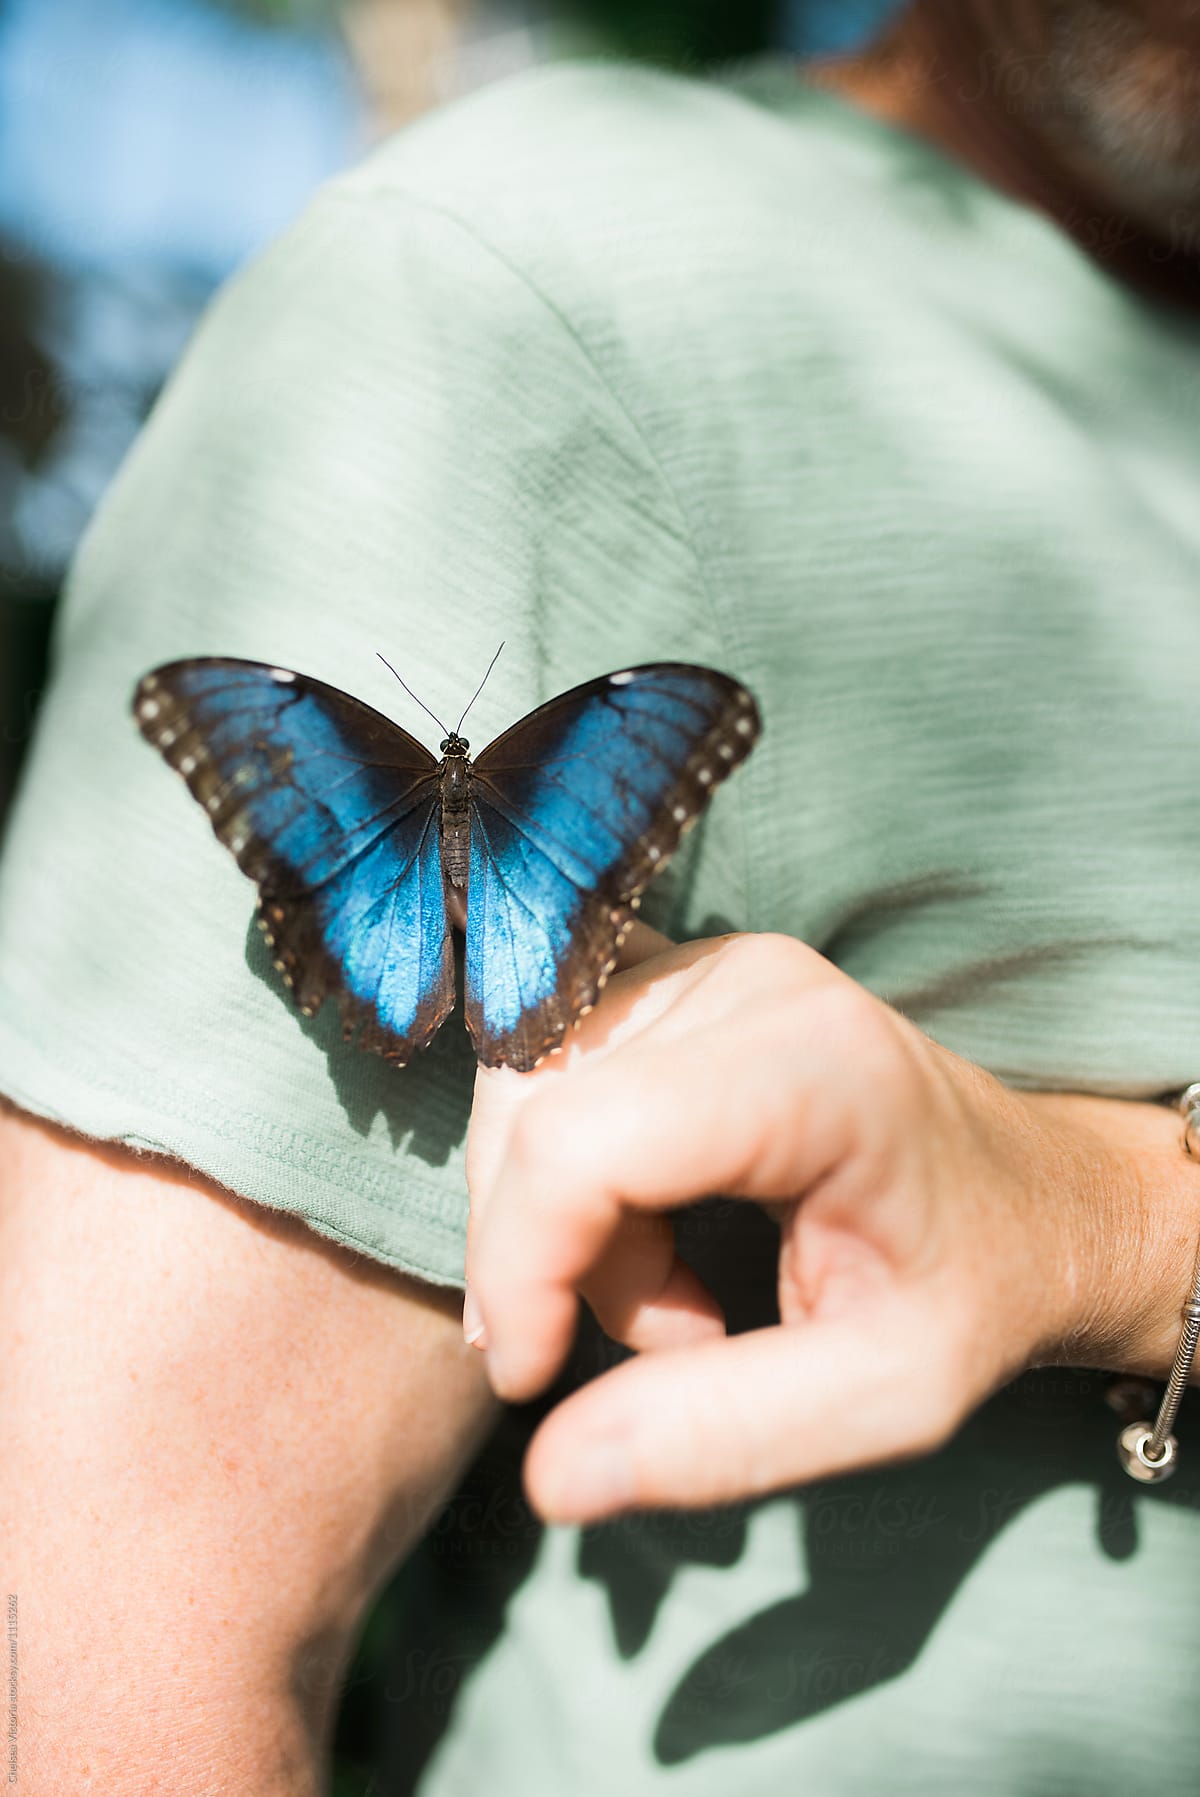 A woman touching a butterfly